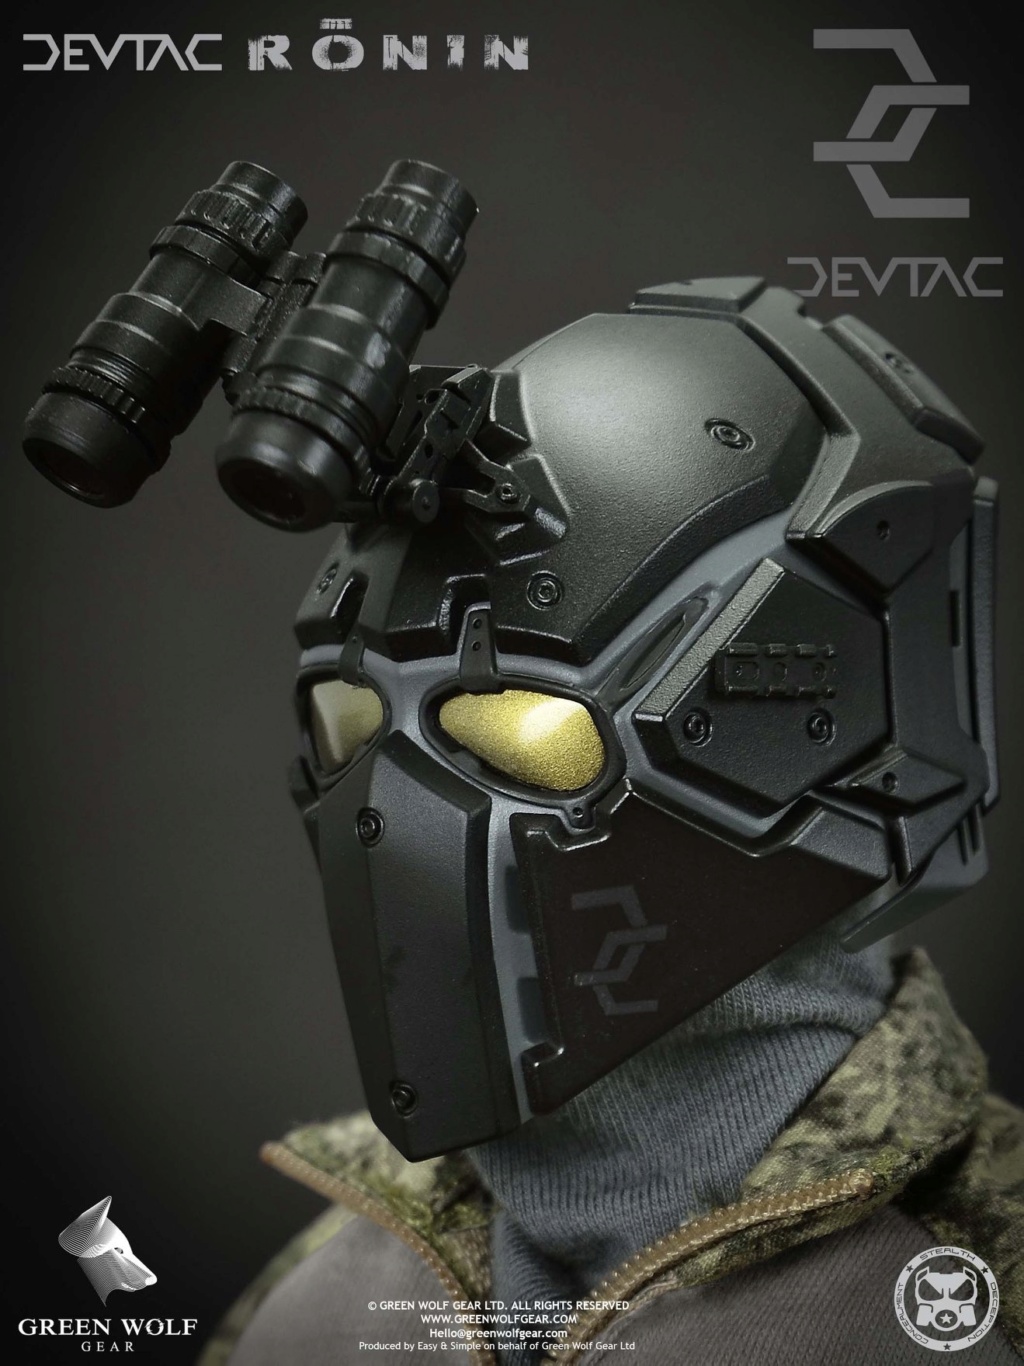 NEW PRODUCT: Green Wolf Gear DEVTAC Ronin 1/6 Action Figure (VS2434P) 1340